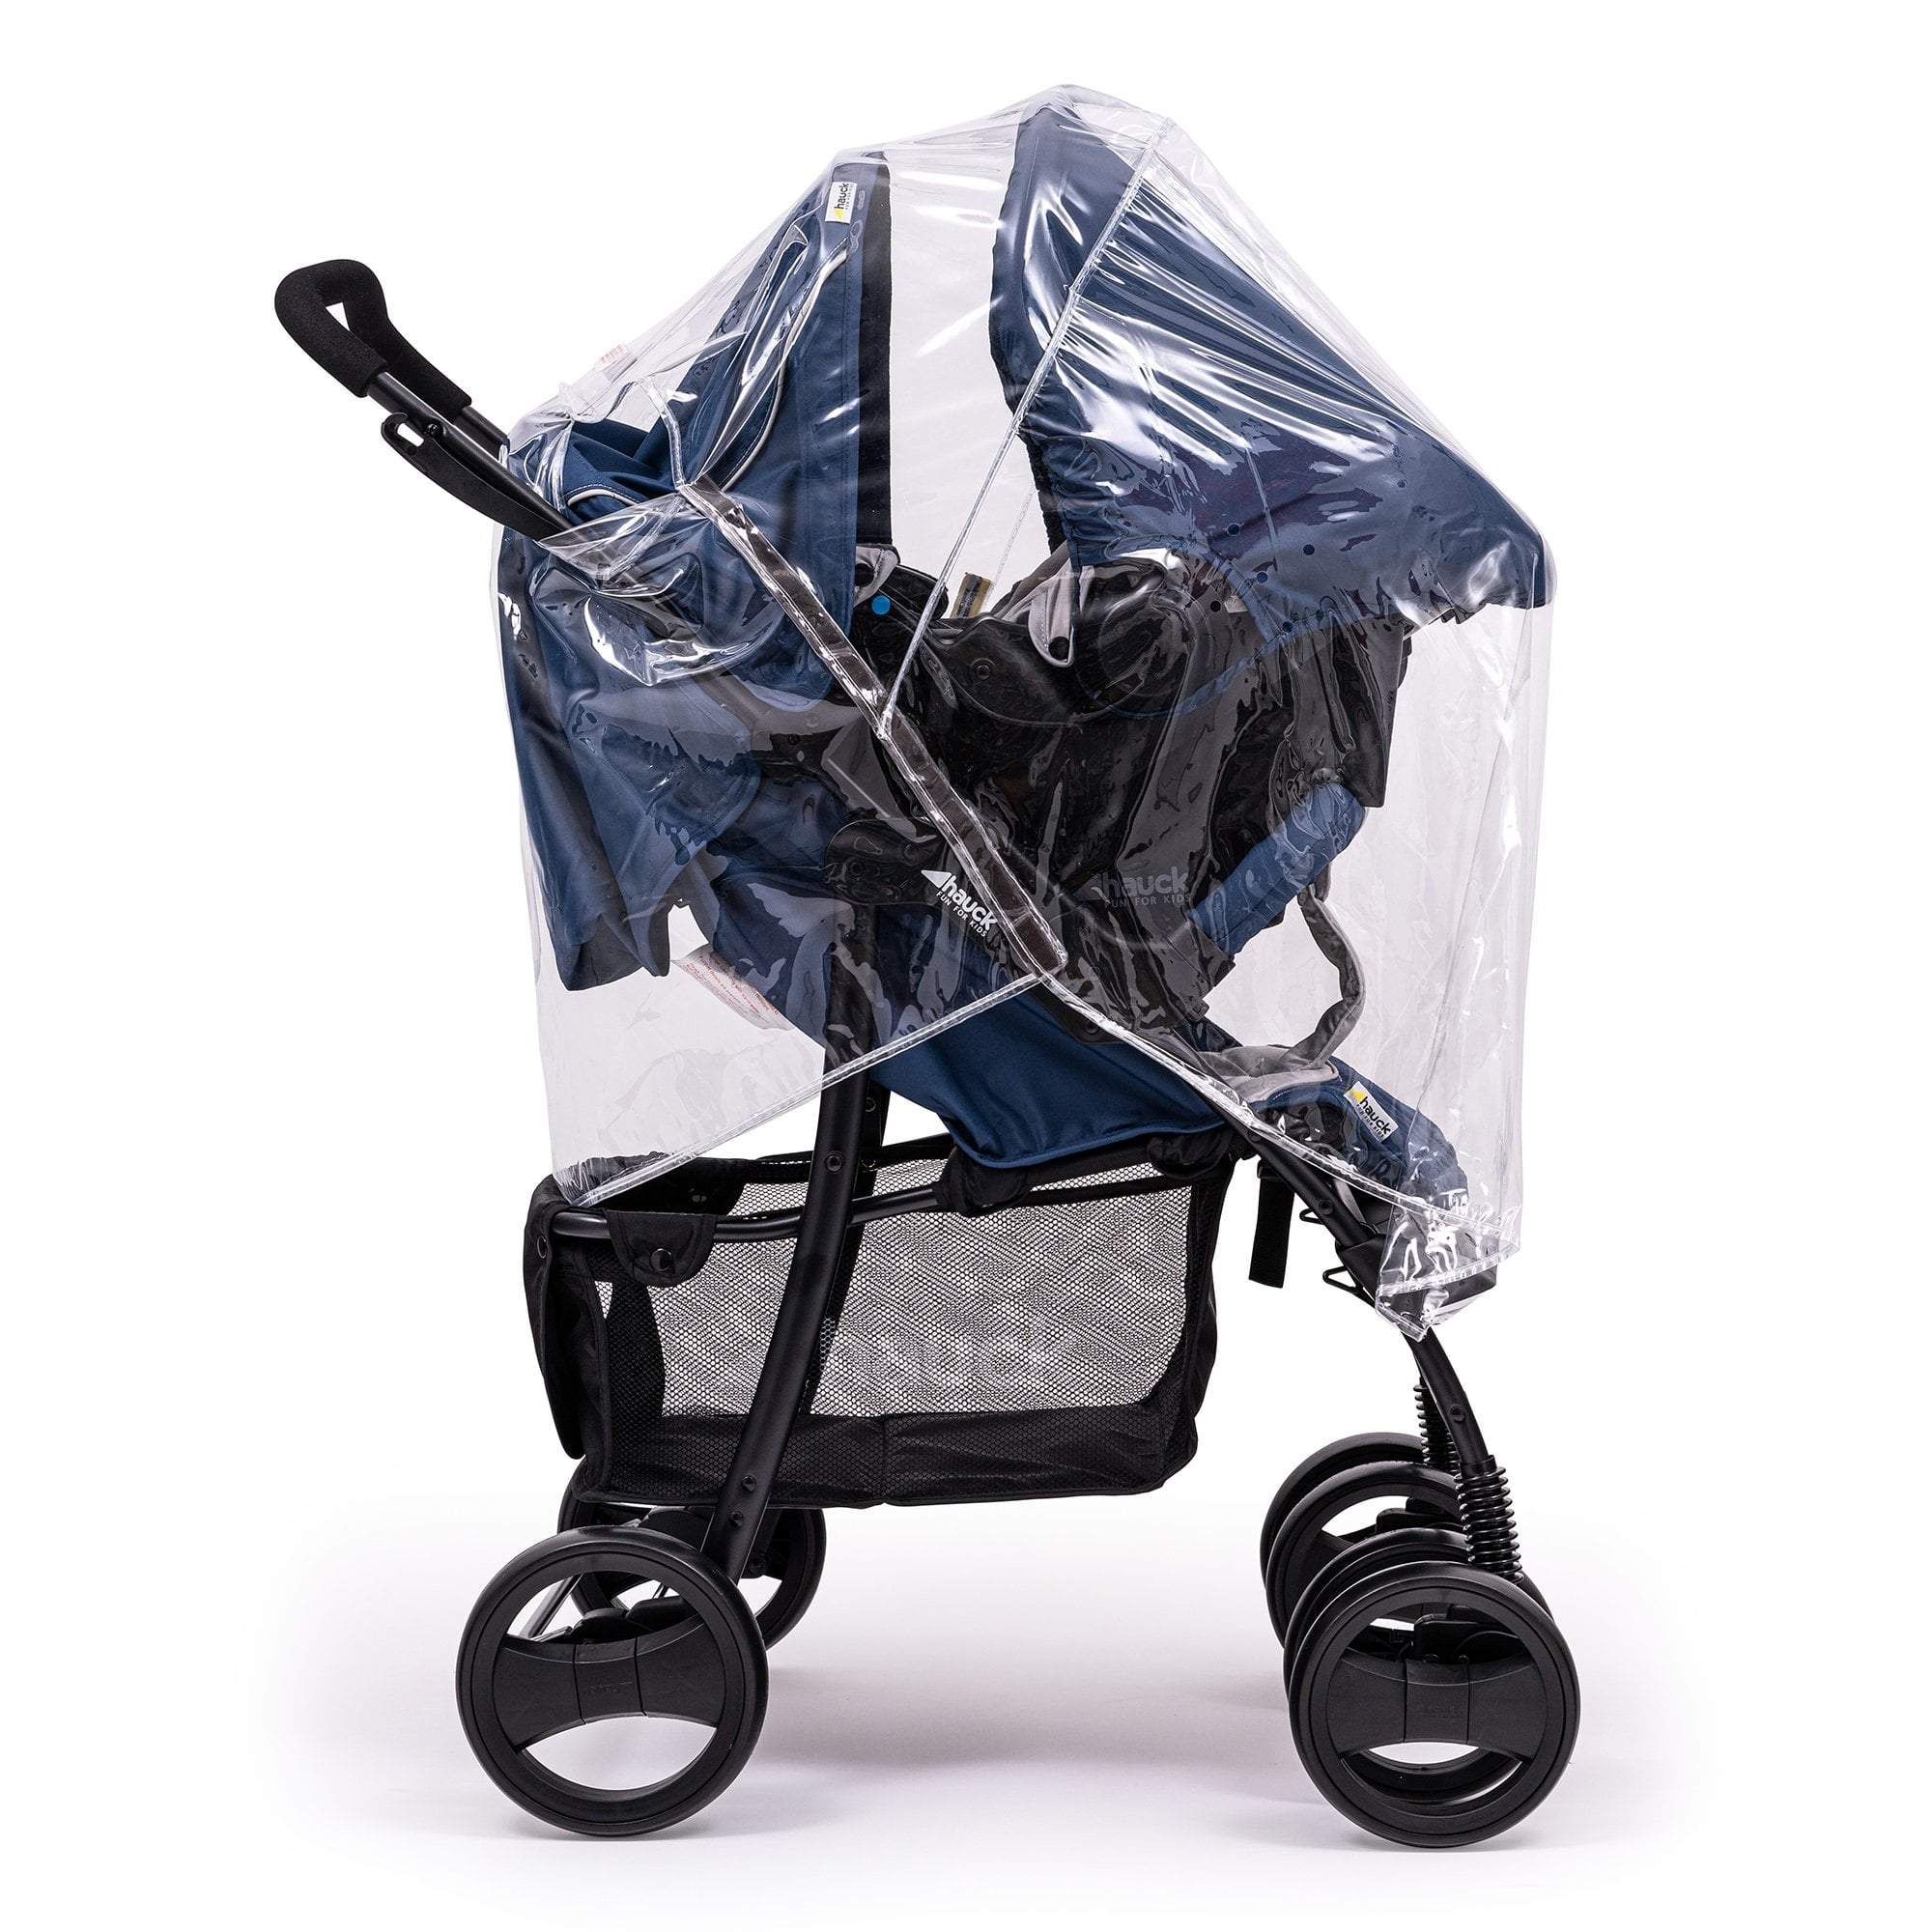 Travel System Raincover Compatible with BabyStyle - Fits All Models -  | For Your Little One